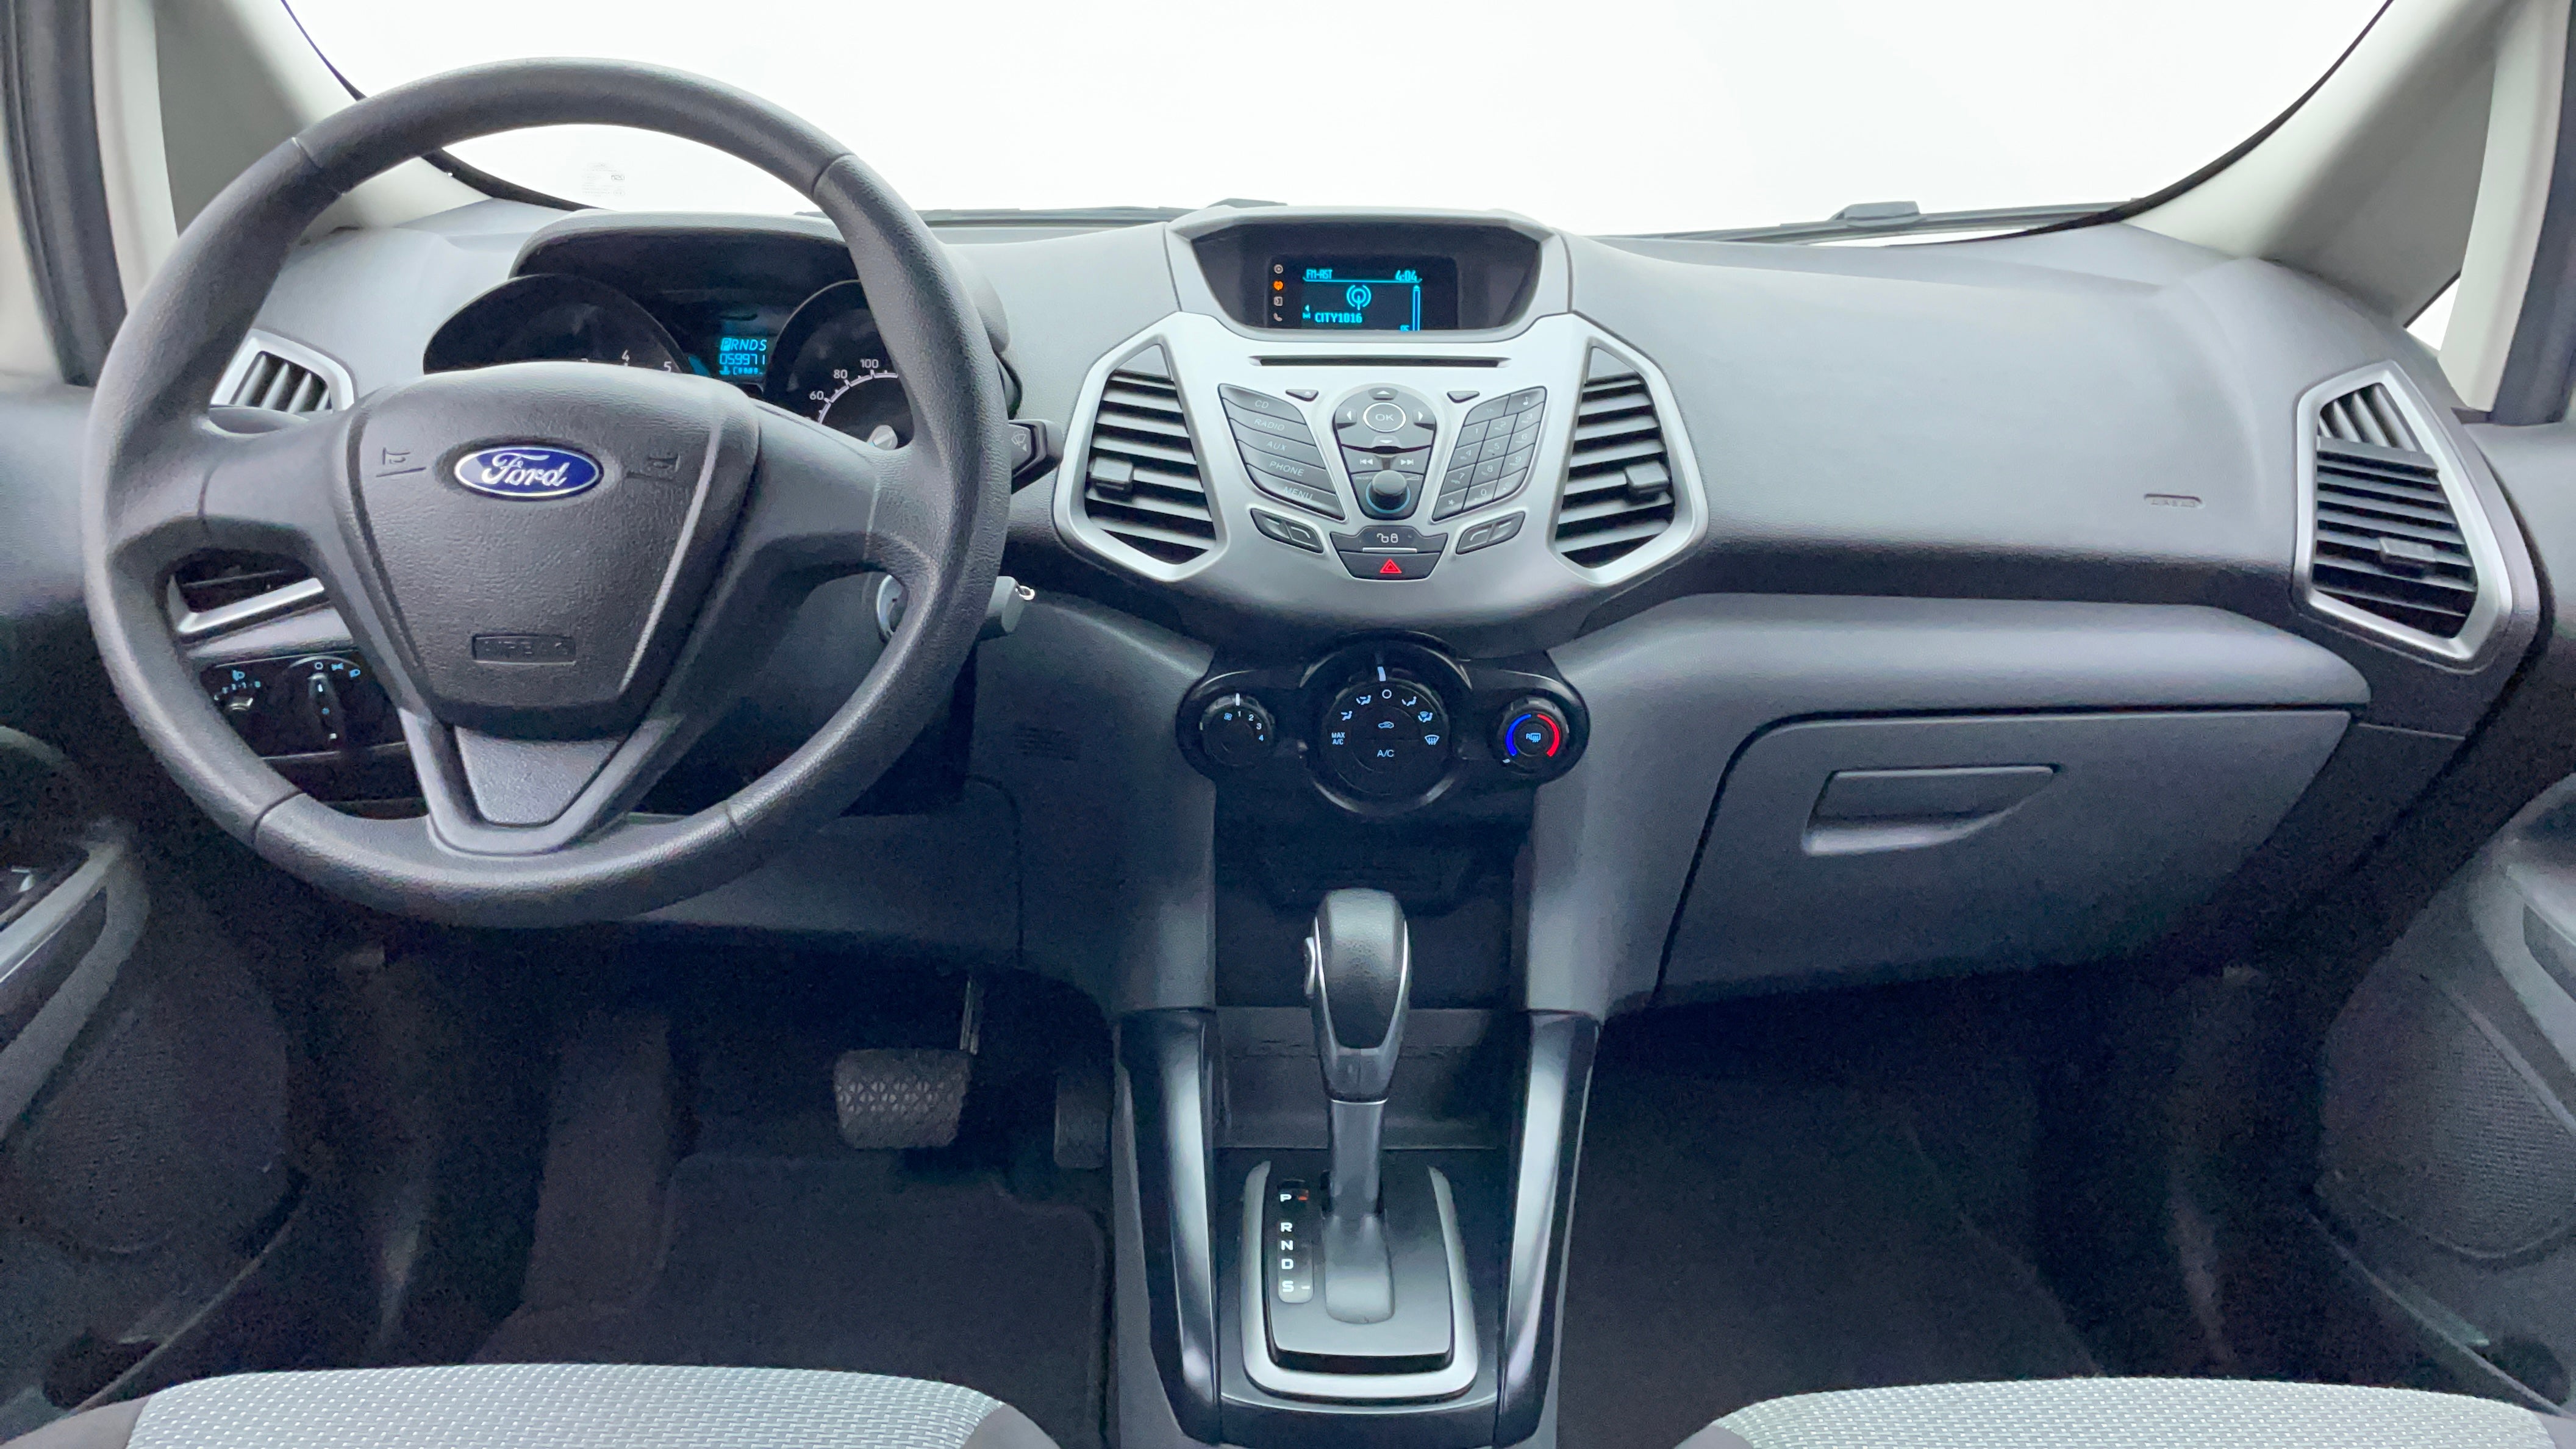 Ford EcoSport-Dashboard View